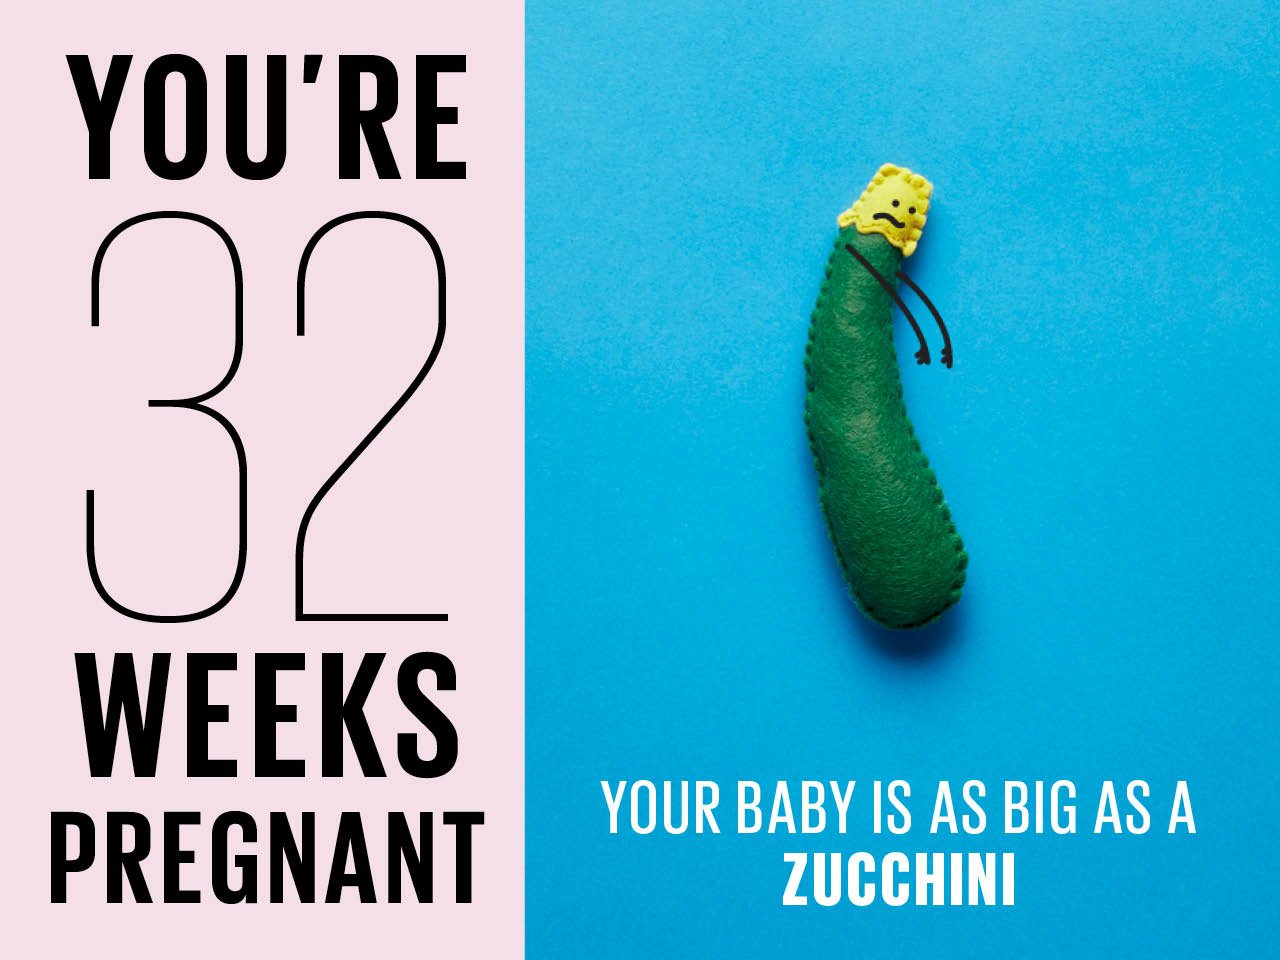 Felt zucchini used to show how big baby is at 32 weeks pregnant